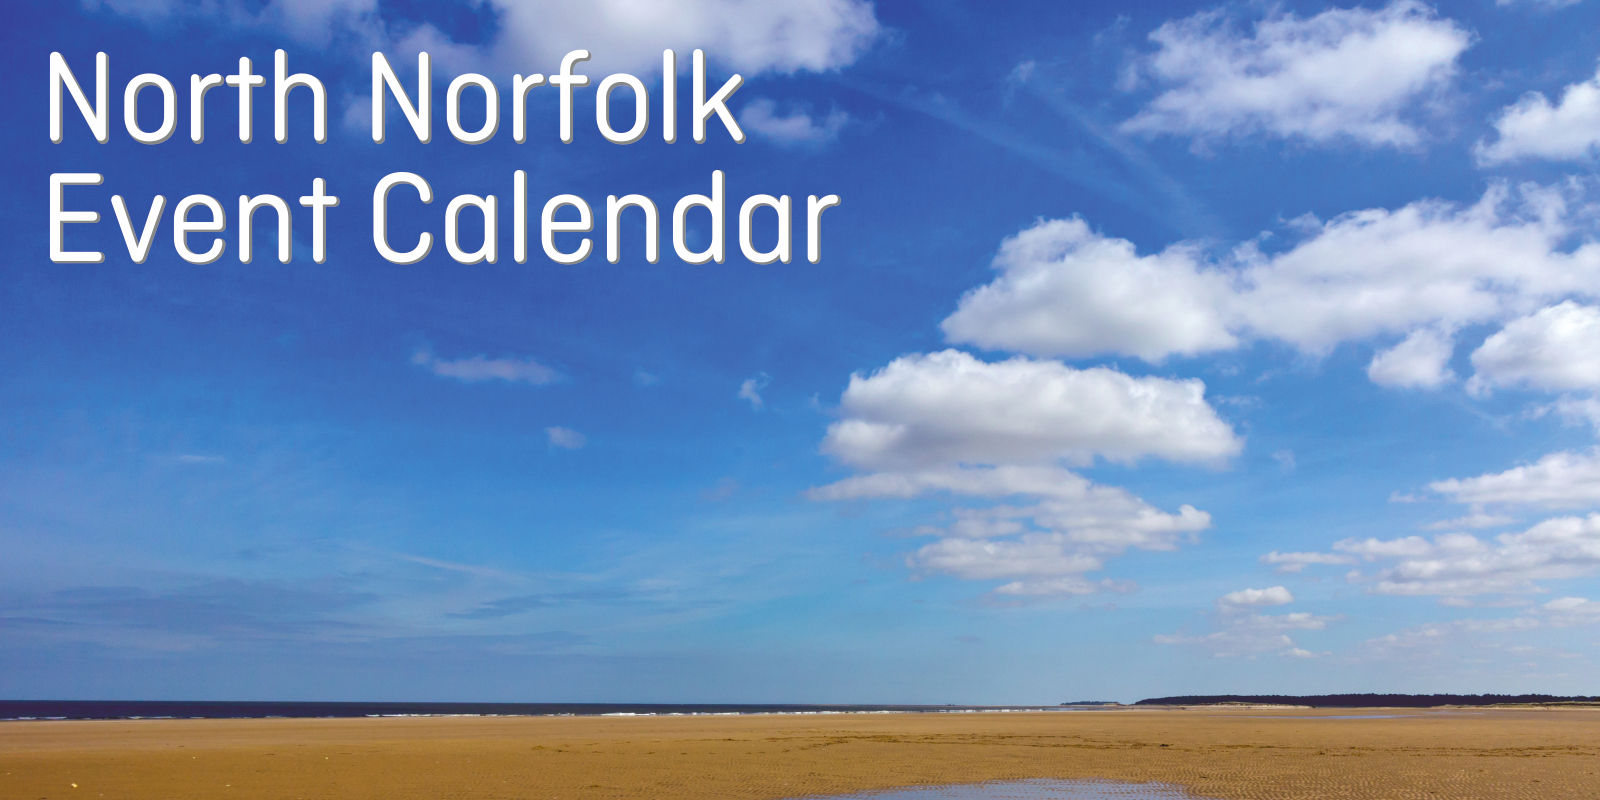 Submit Events | Add Events | Post Events | North Norfolk Events Calendar